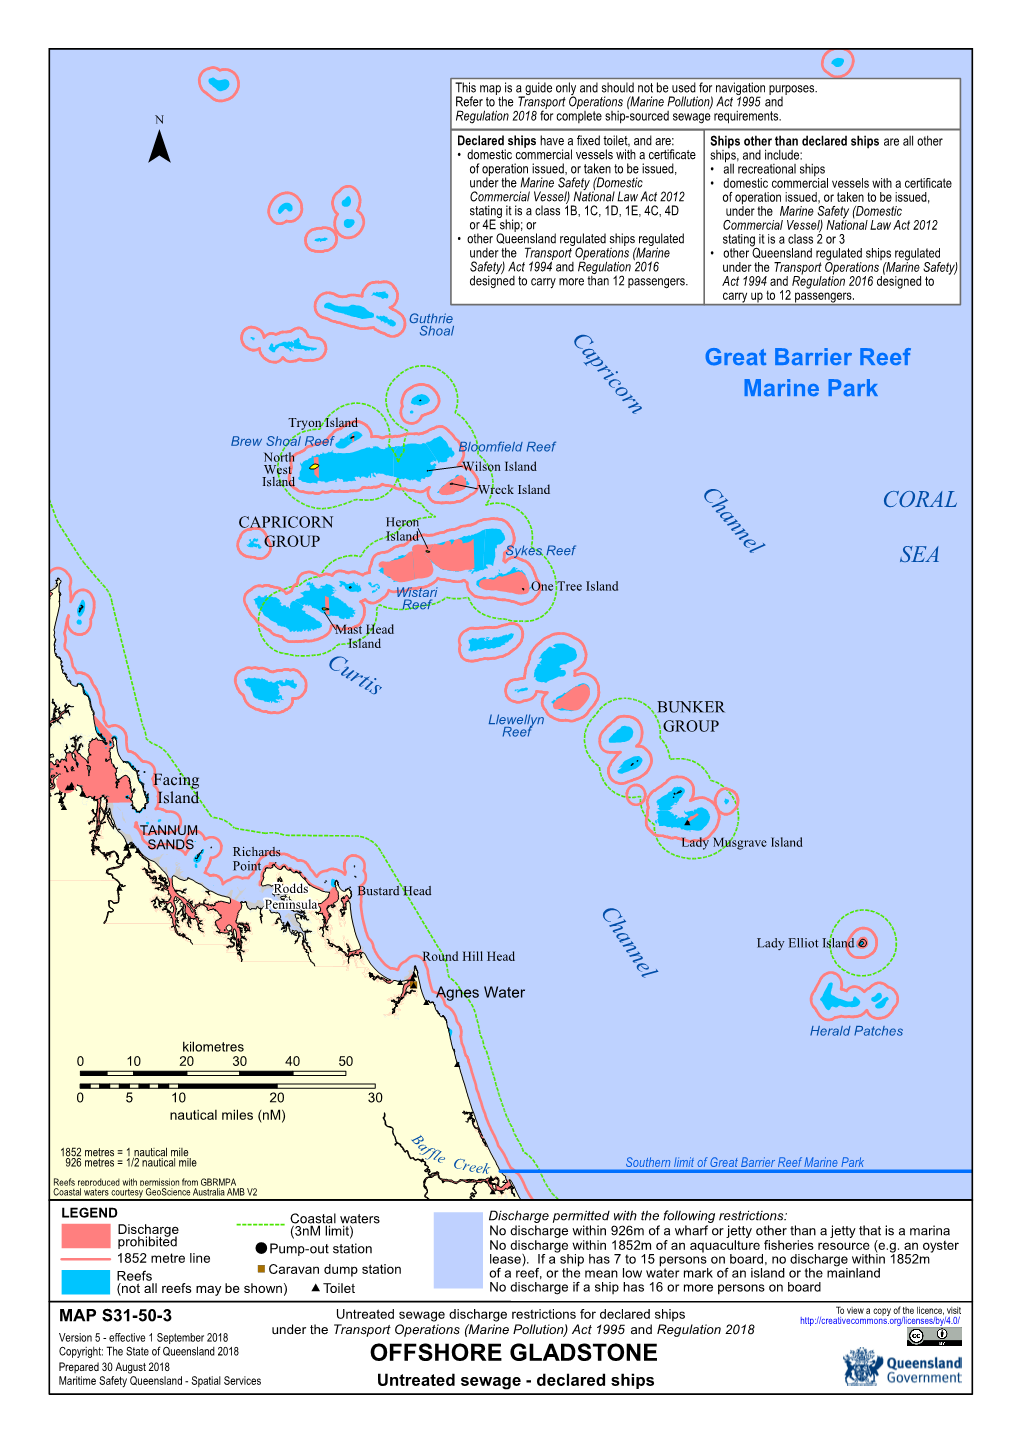 Offshore Gladstone Untreated Sewage – Declared Ships